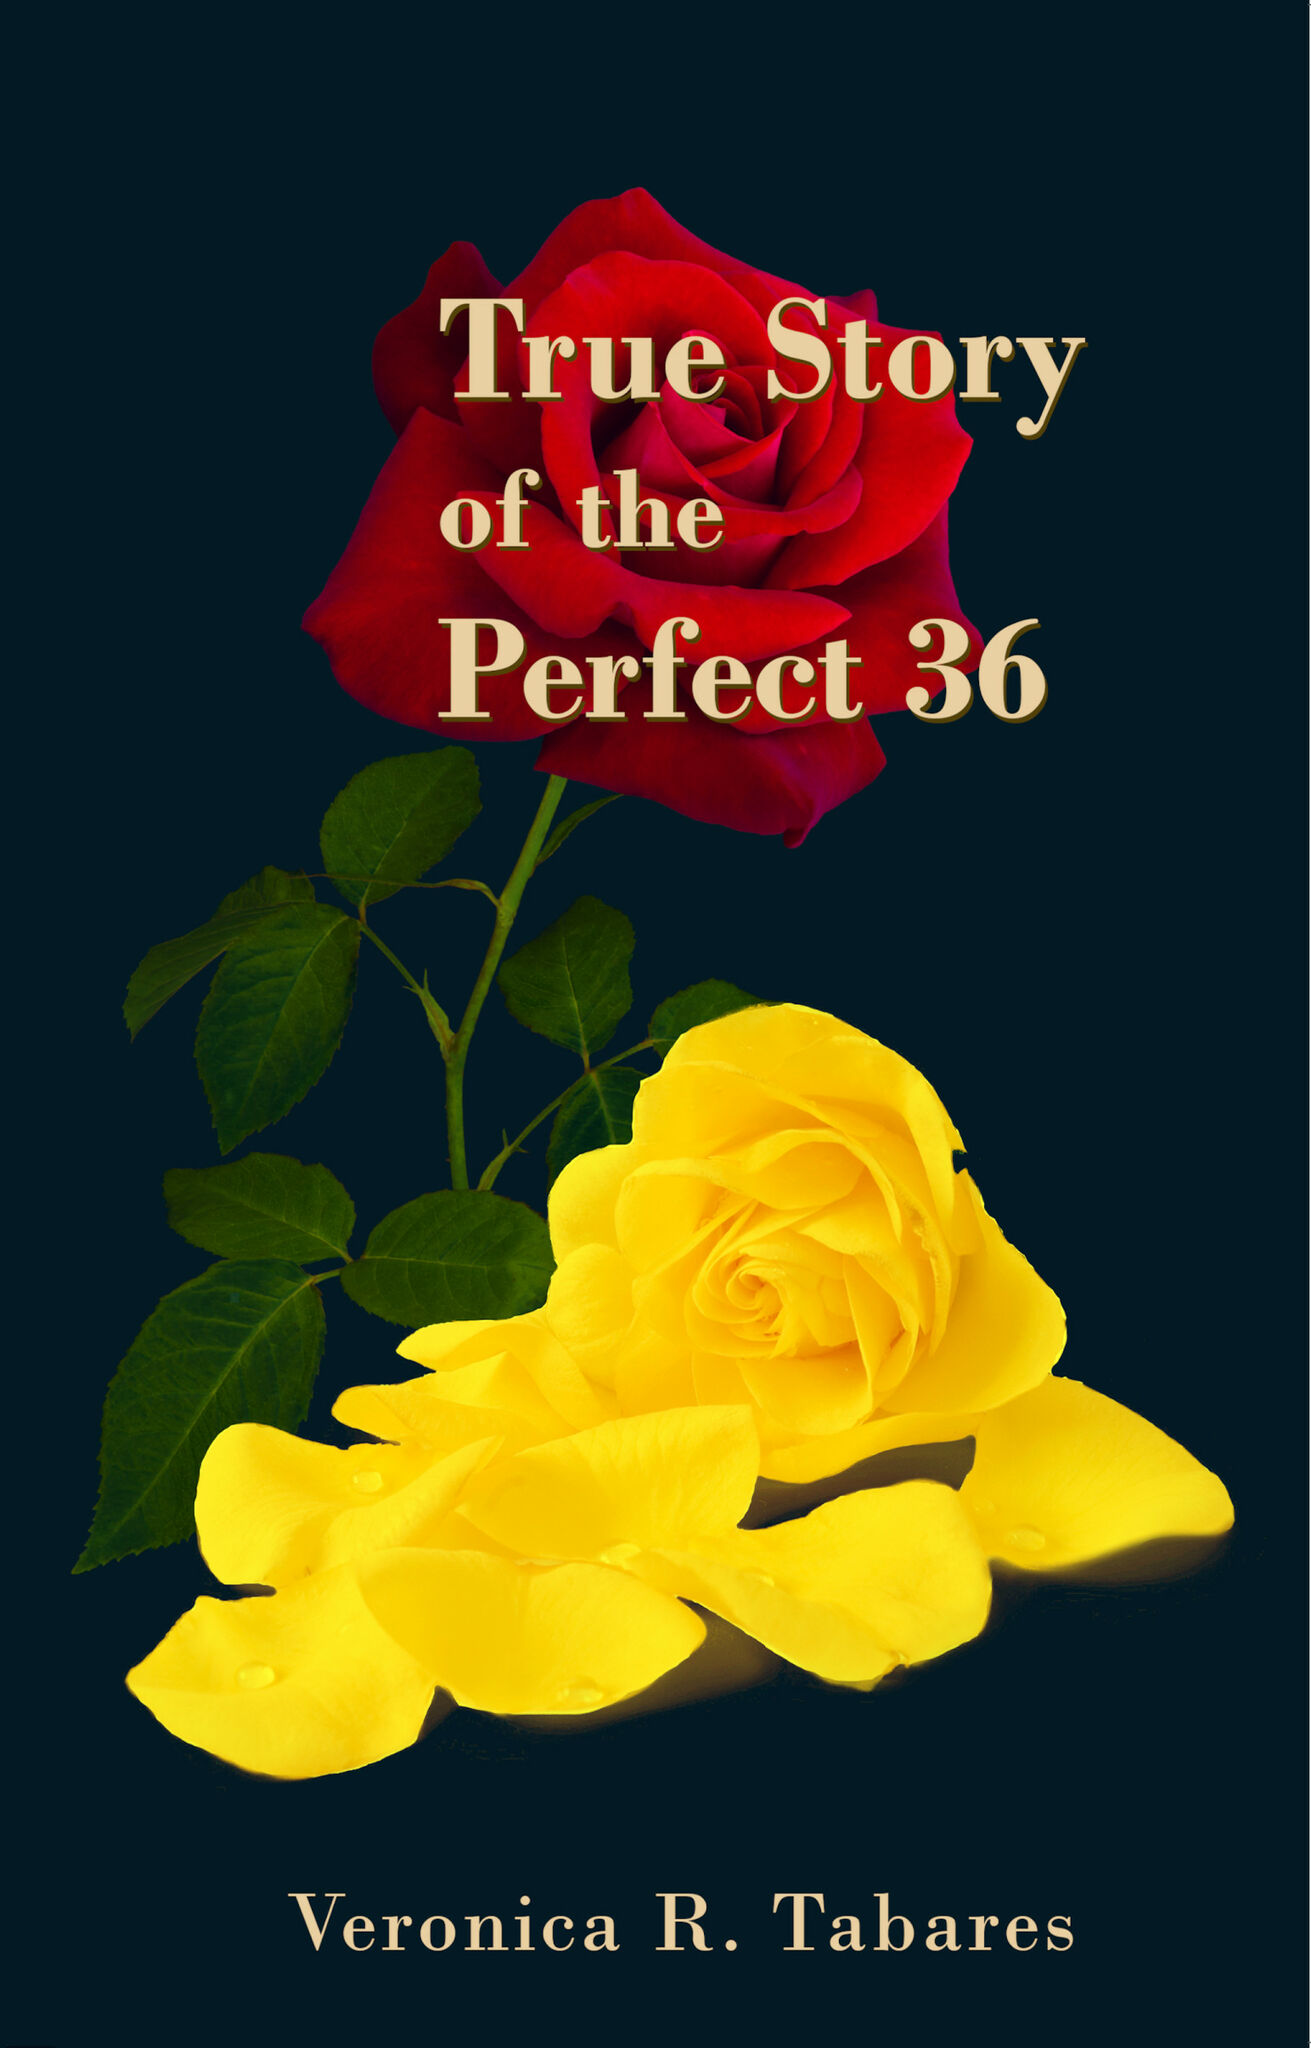 TRUE STORY OF THE PERFECT 36